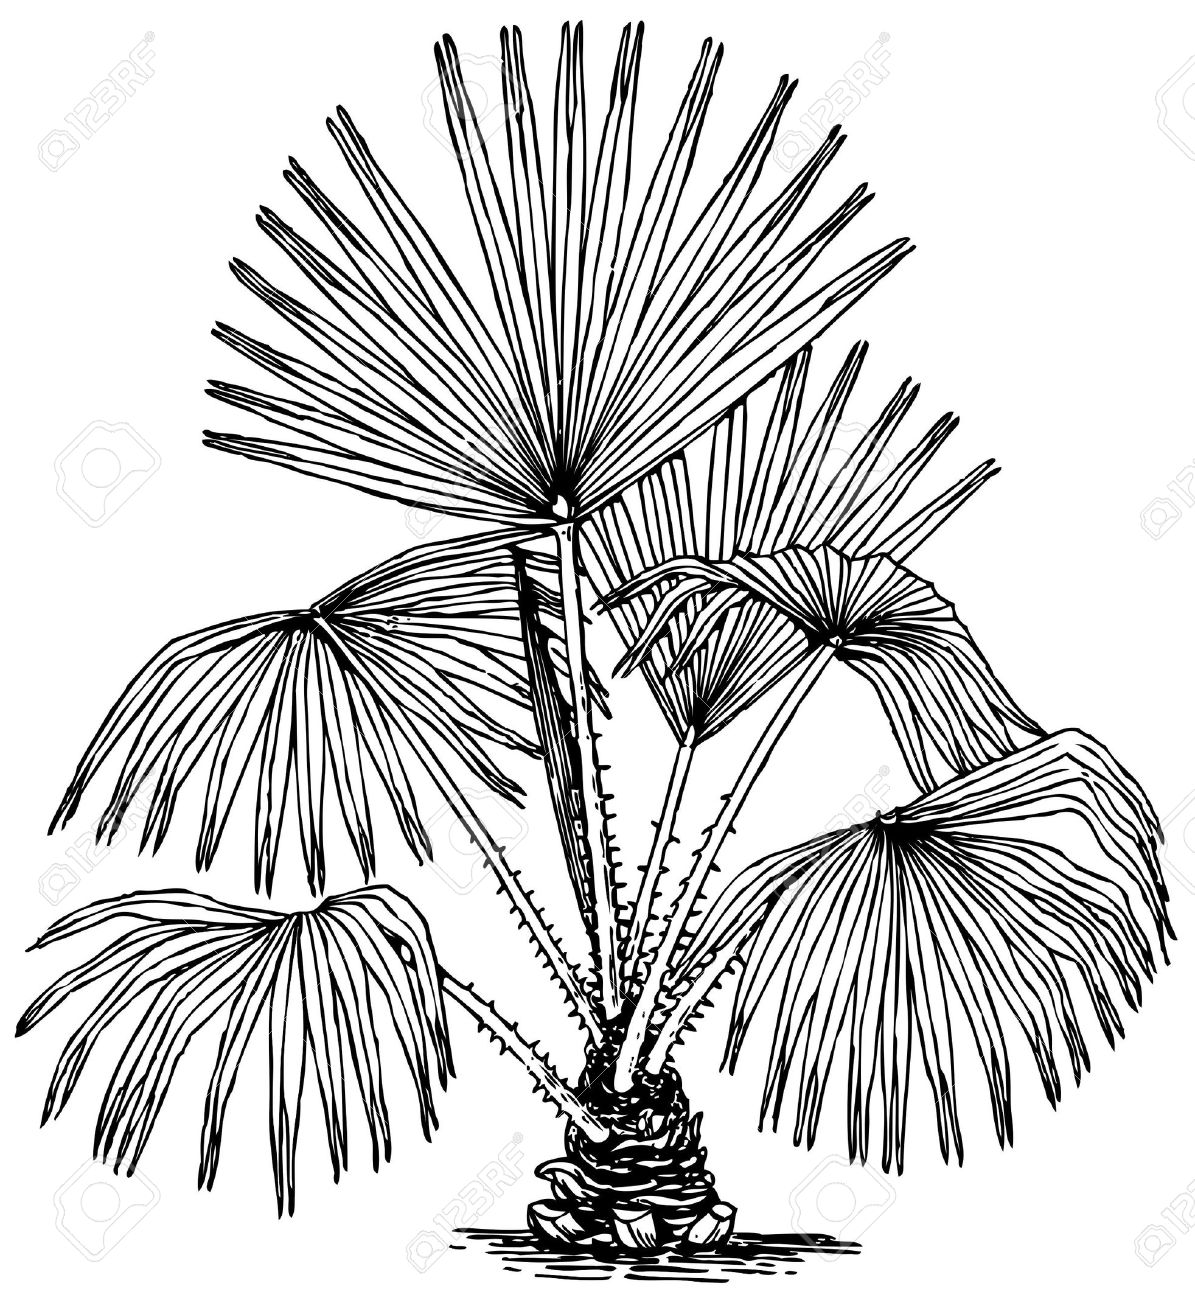 Swamp cabbage tree clipart.